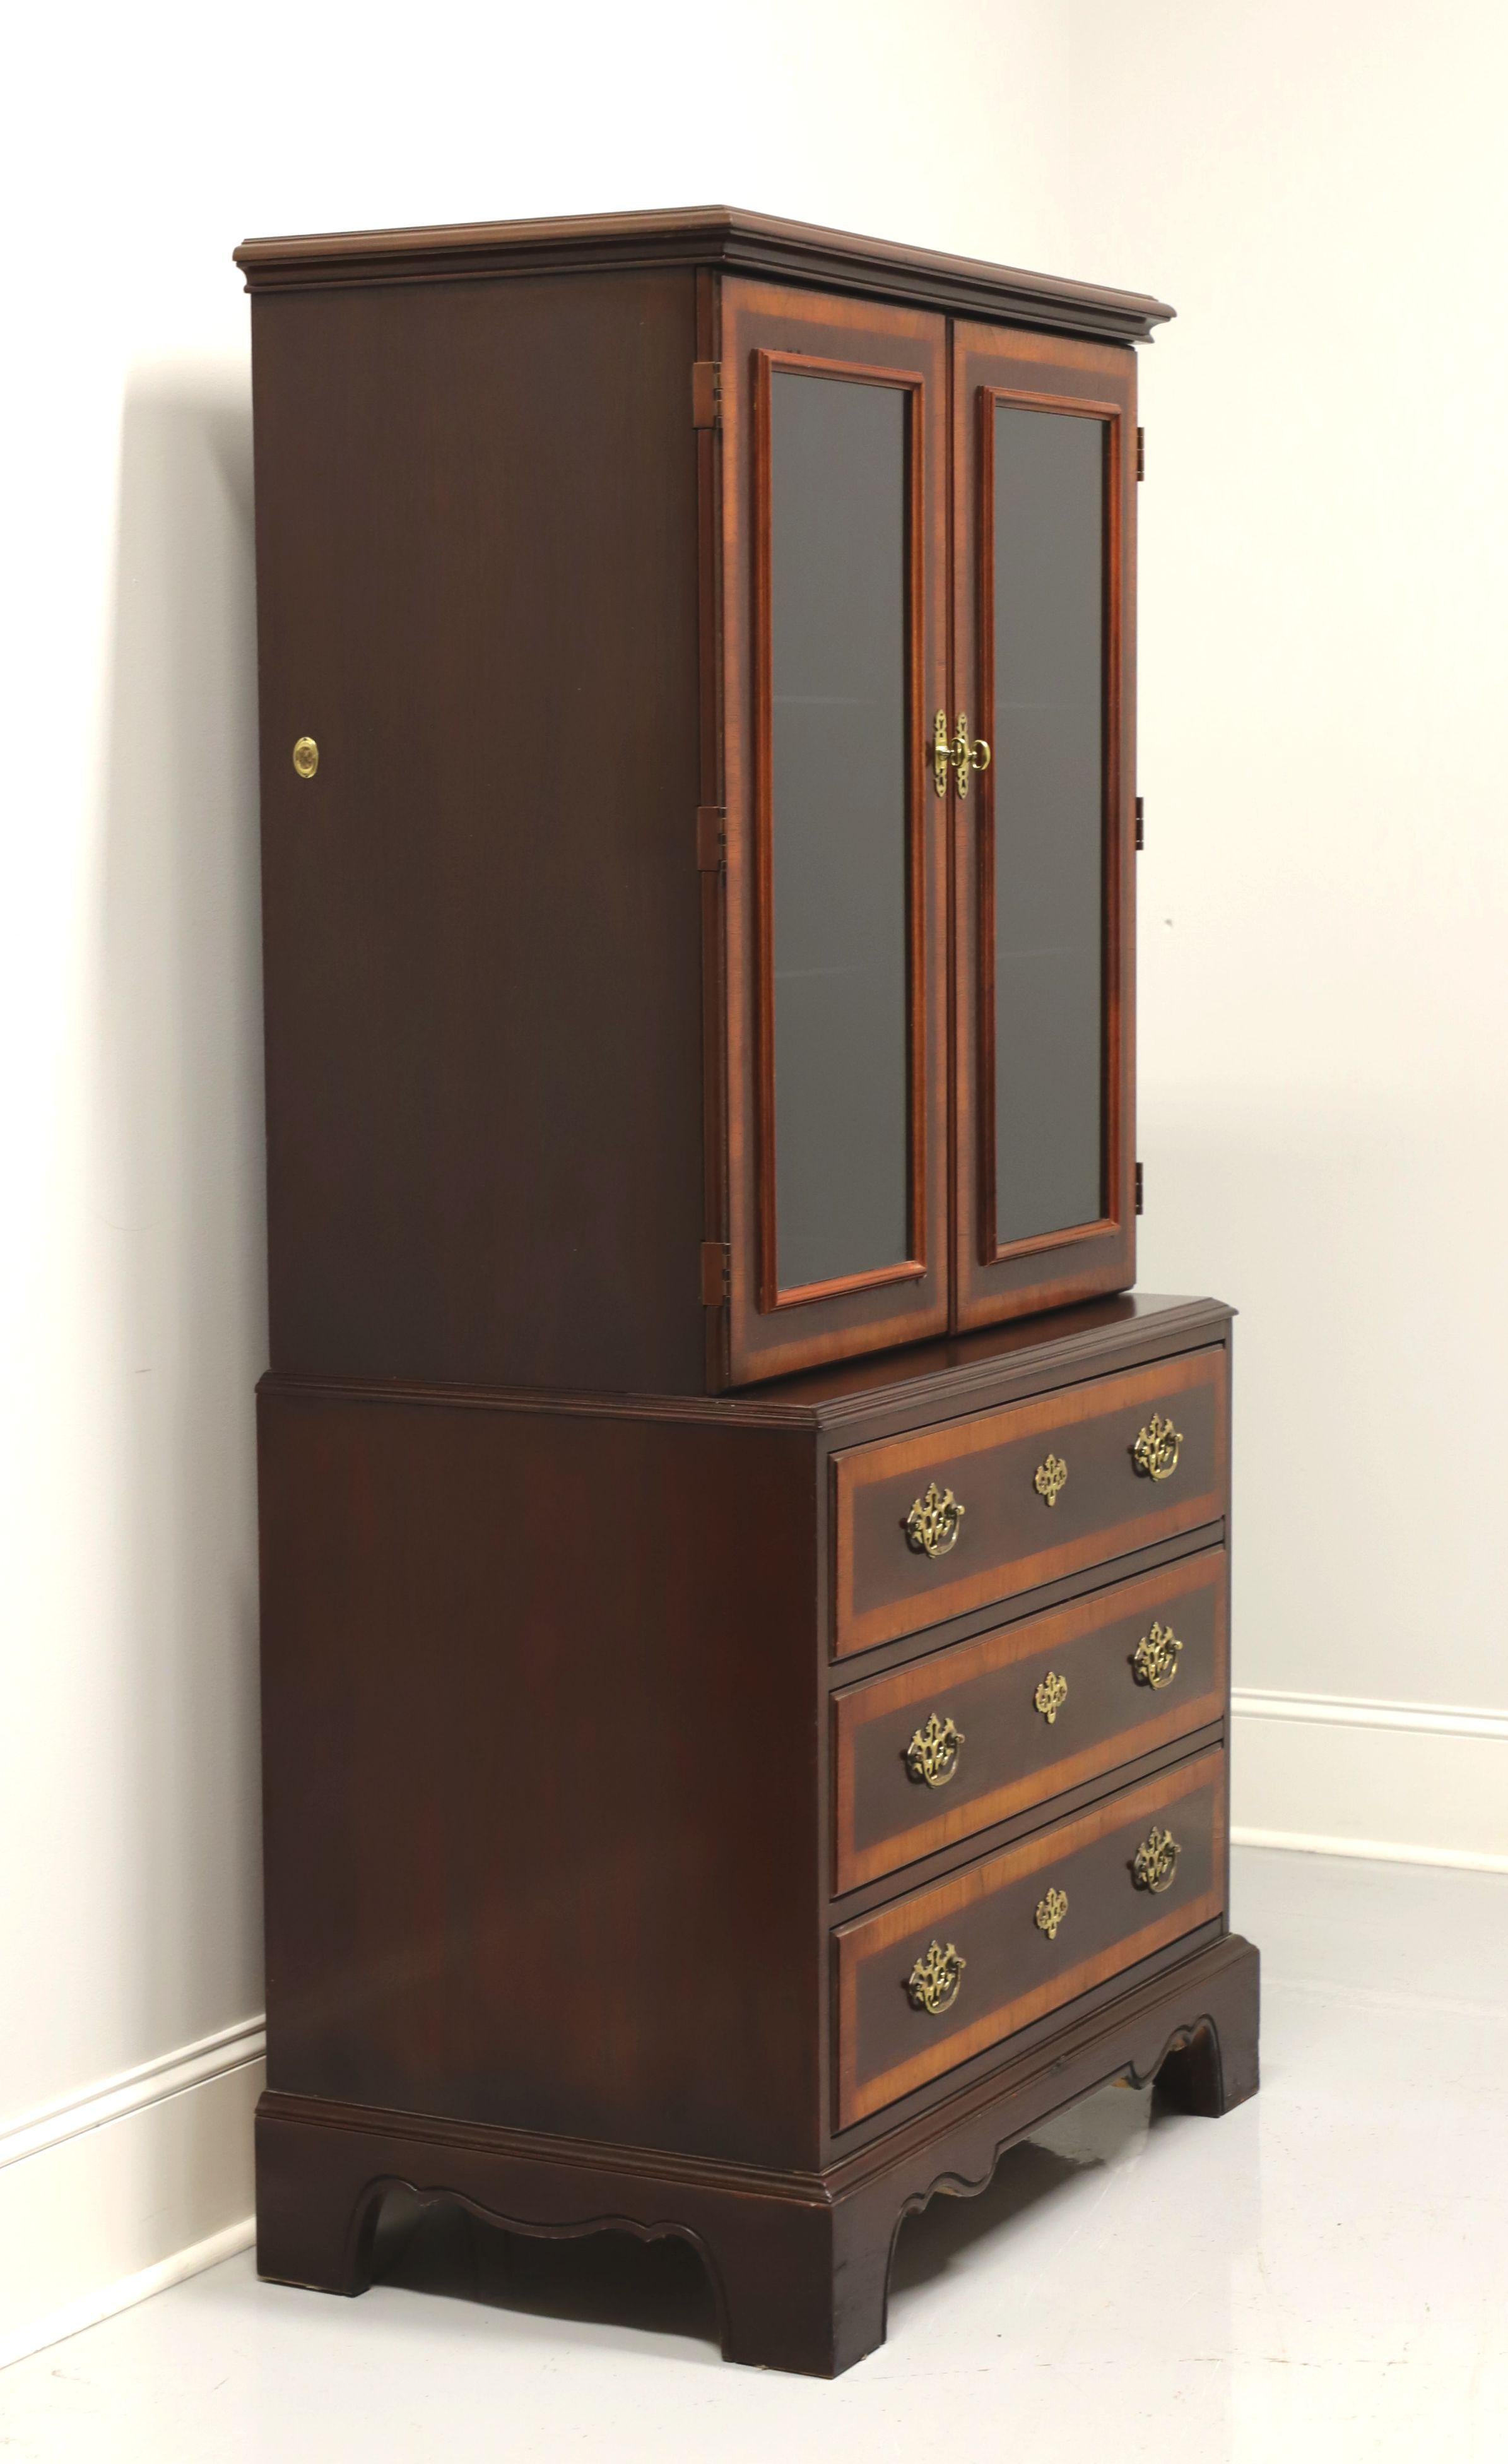 A Chippendale style display cabinet by Drexel, from their 18th Century Collection. Banded mahogany with brass hardware. Upper cabinet with dual glass doors, lighted interior and two adjustable glass shelves. Lower cabinet with three drawers of